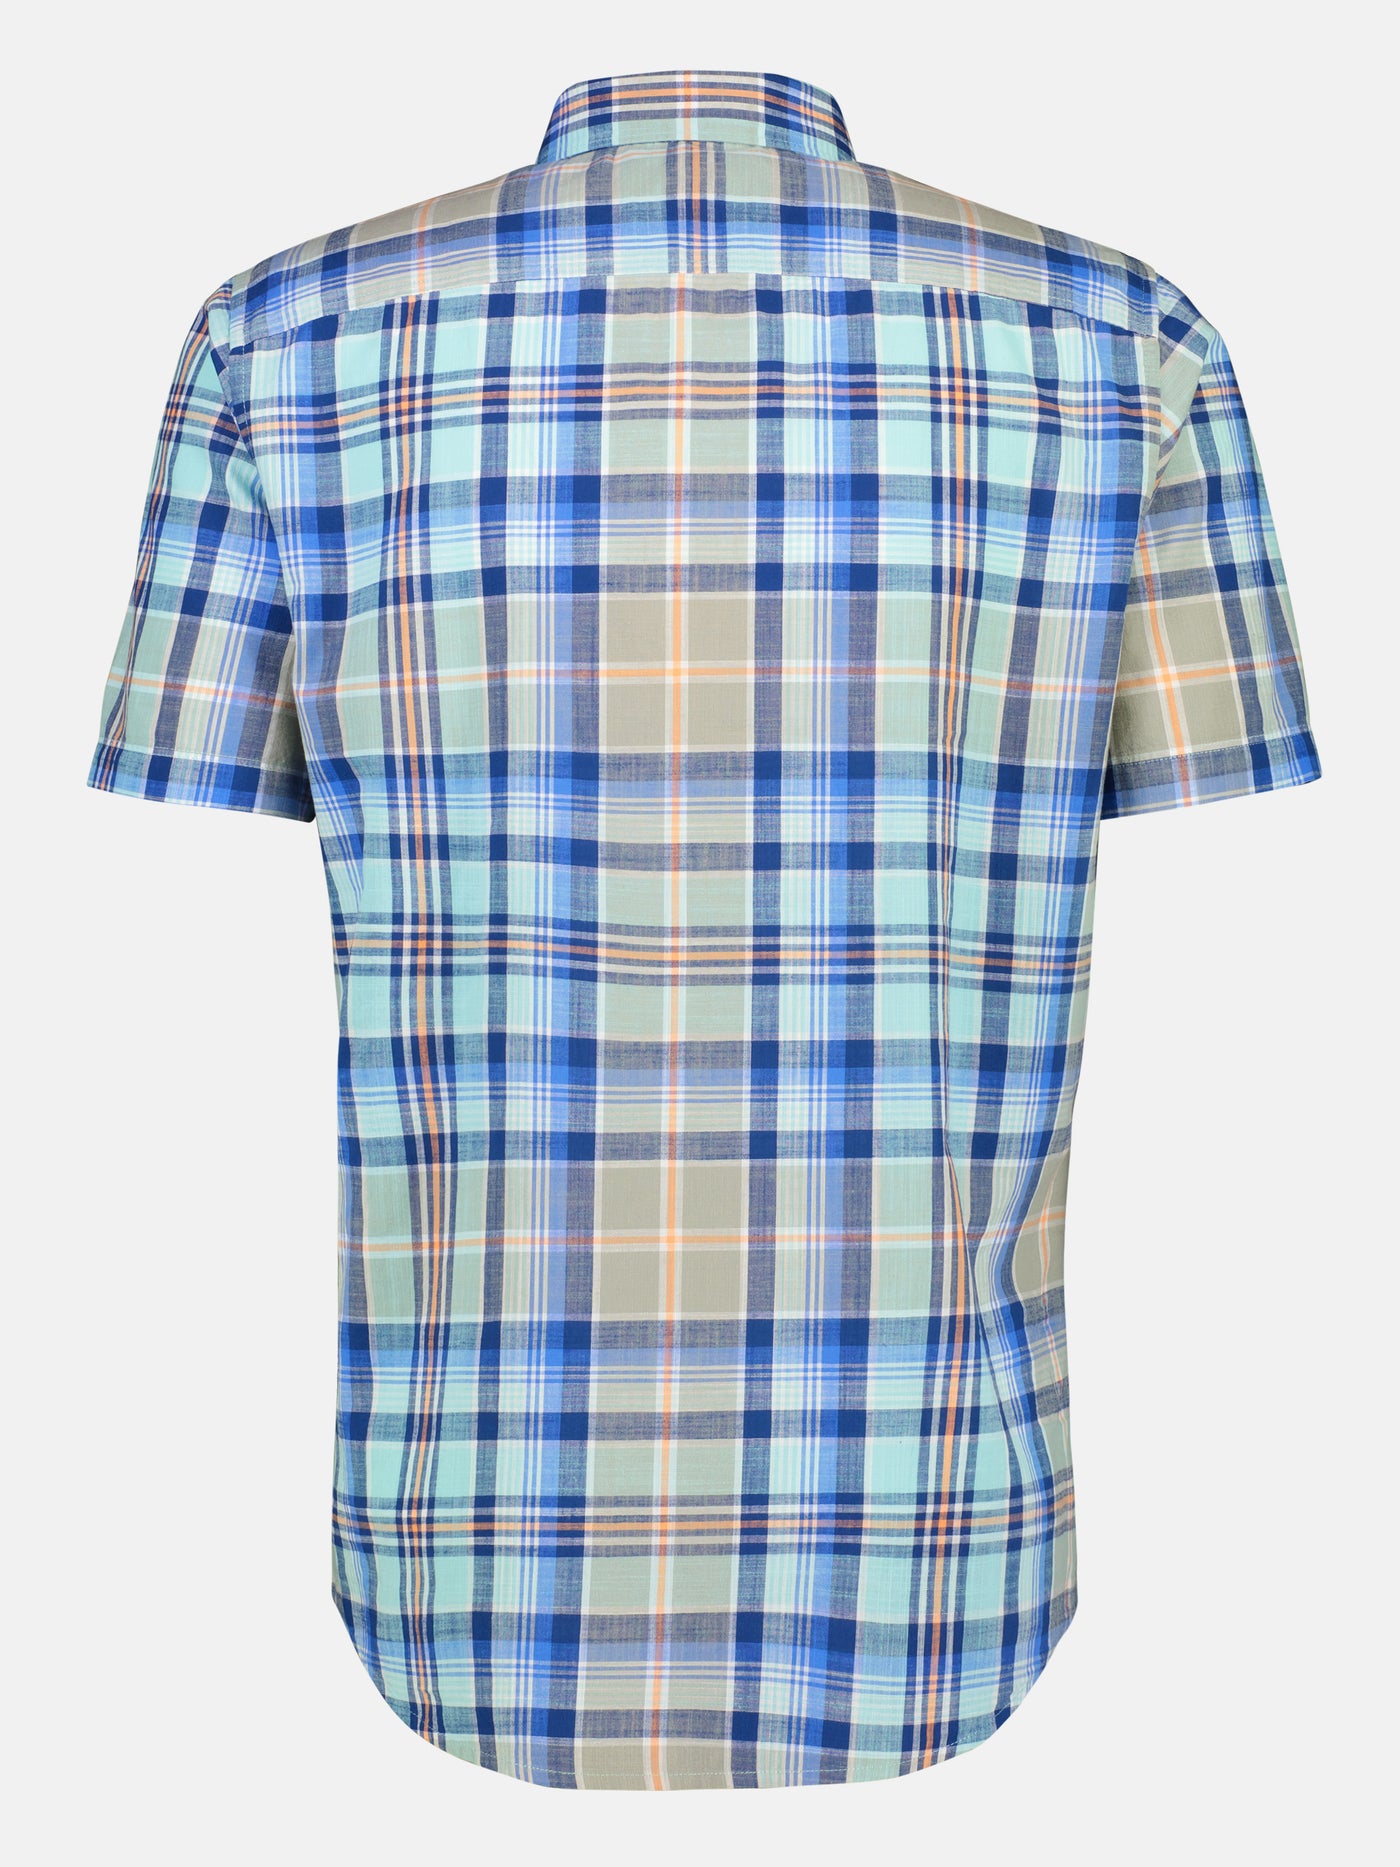 Short-sleeved shirt with a sporty check